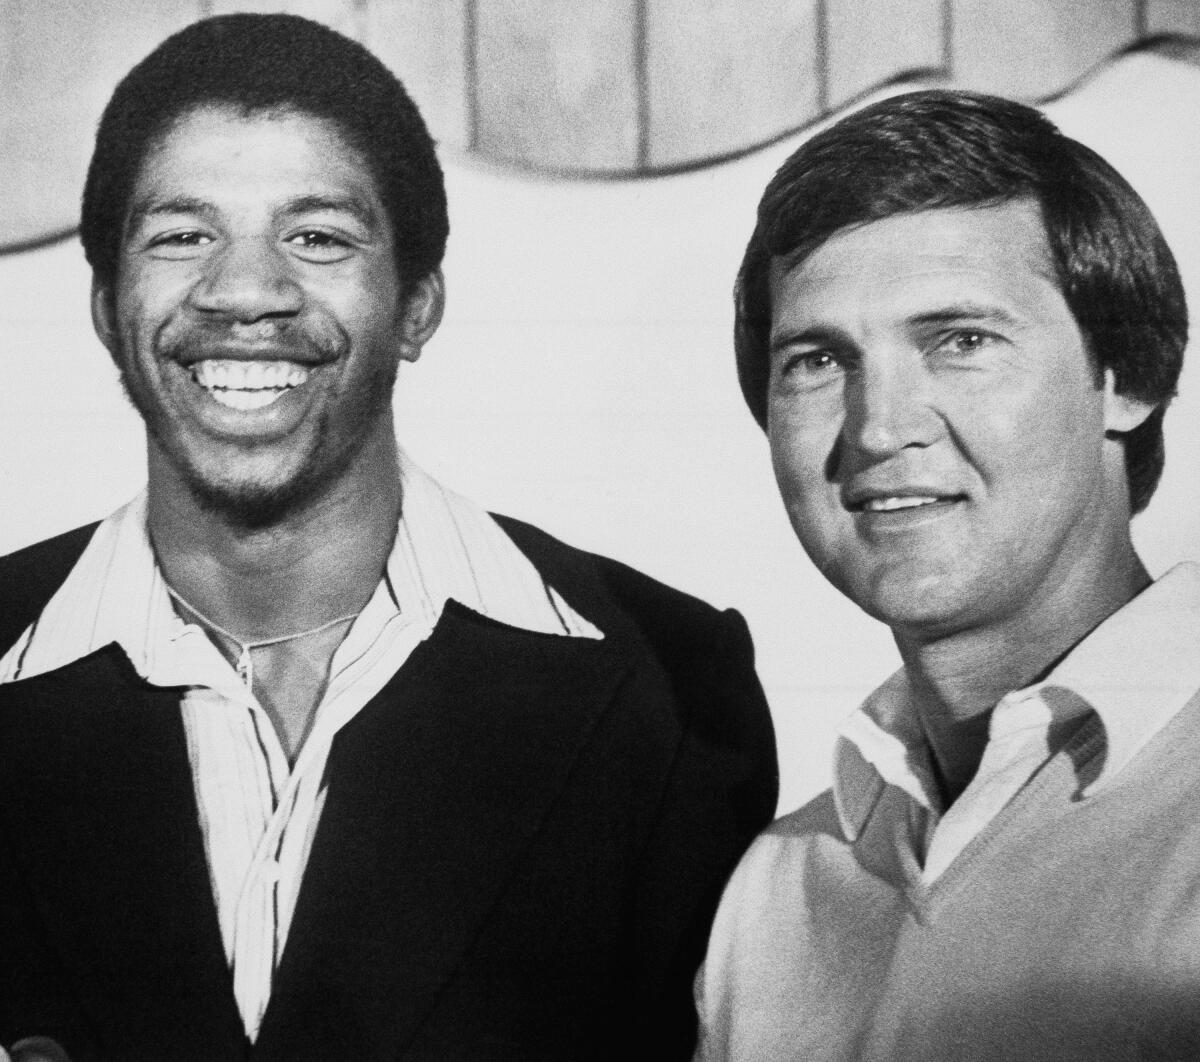 Magic Johnson, left, and Jerry West in a black-and-white photo from May 16, 1979